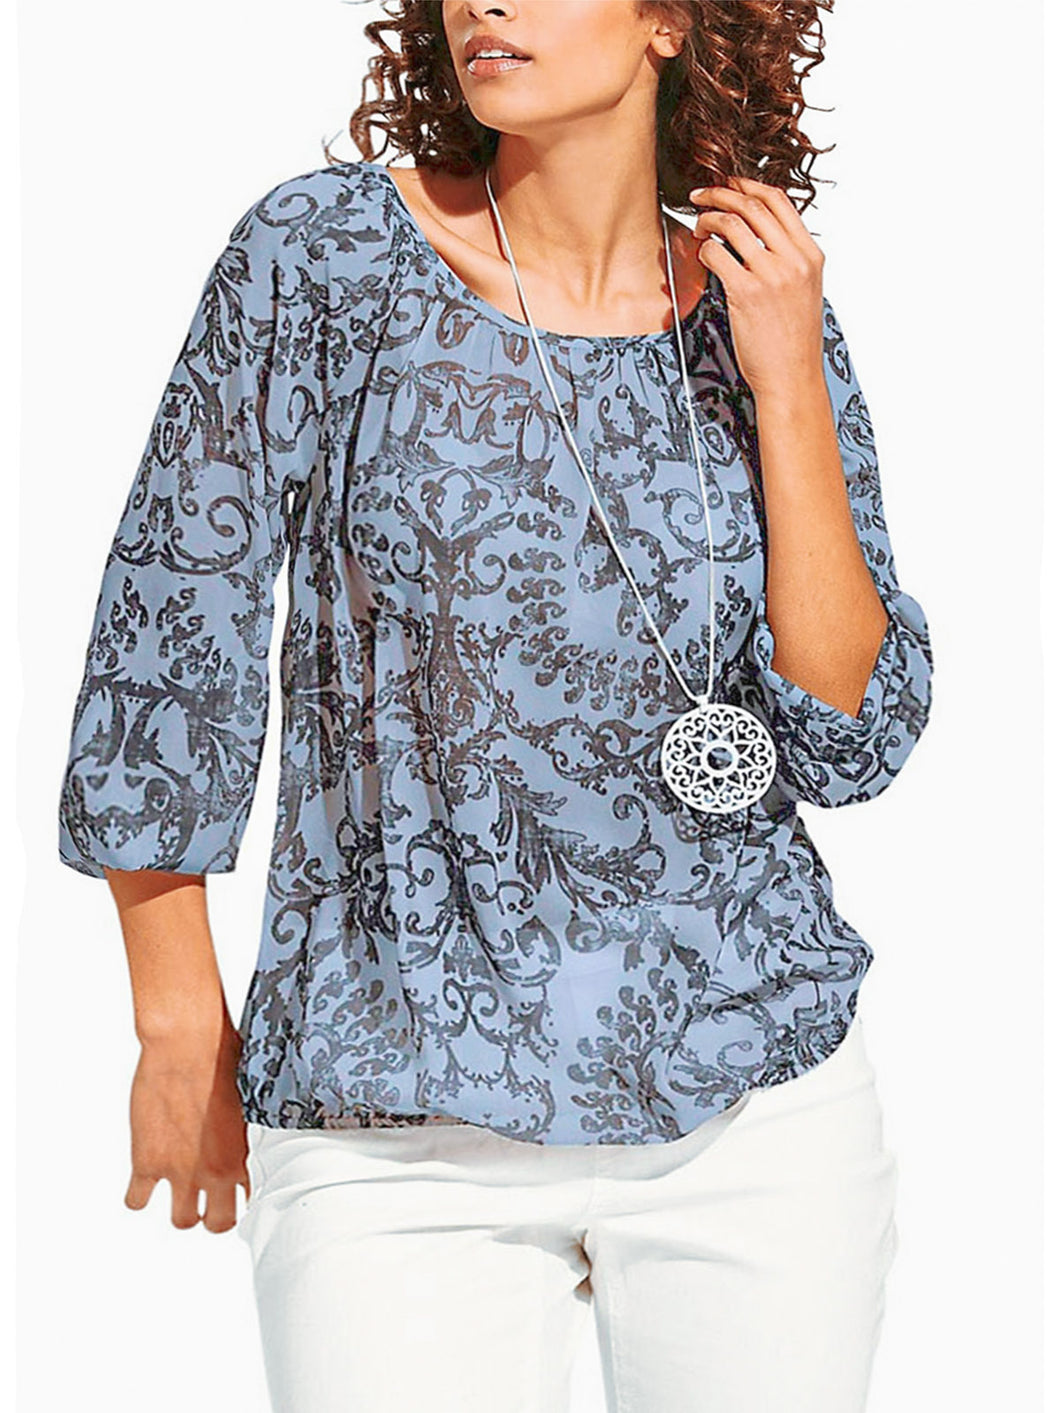 Ladies Floral Gypsy Relax Fit Long Sleeve Tunic Tops